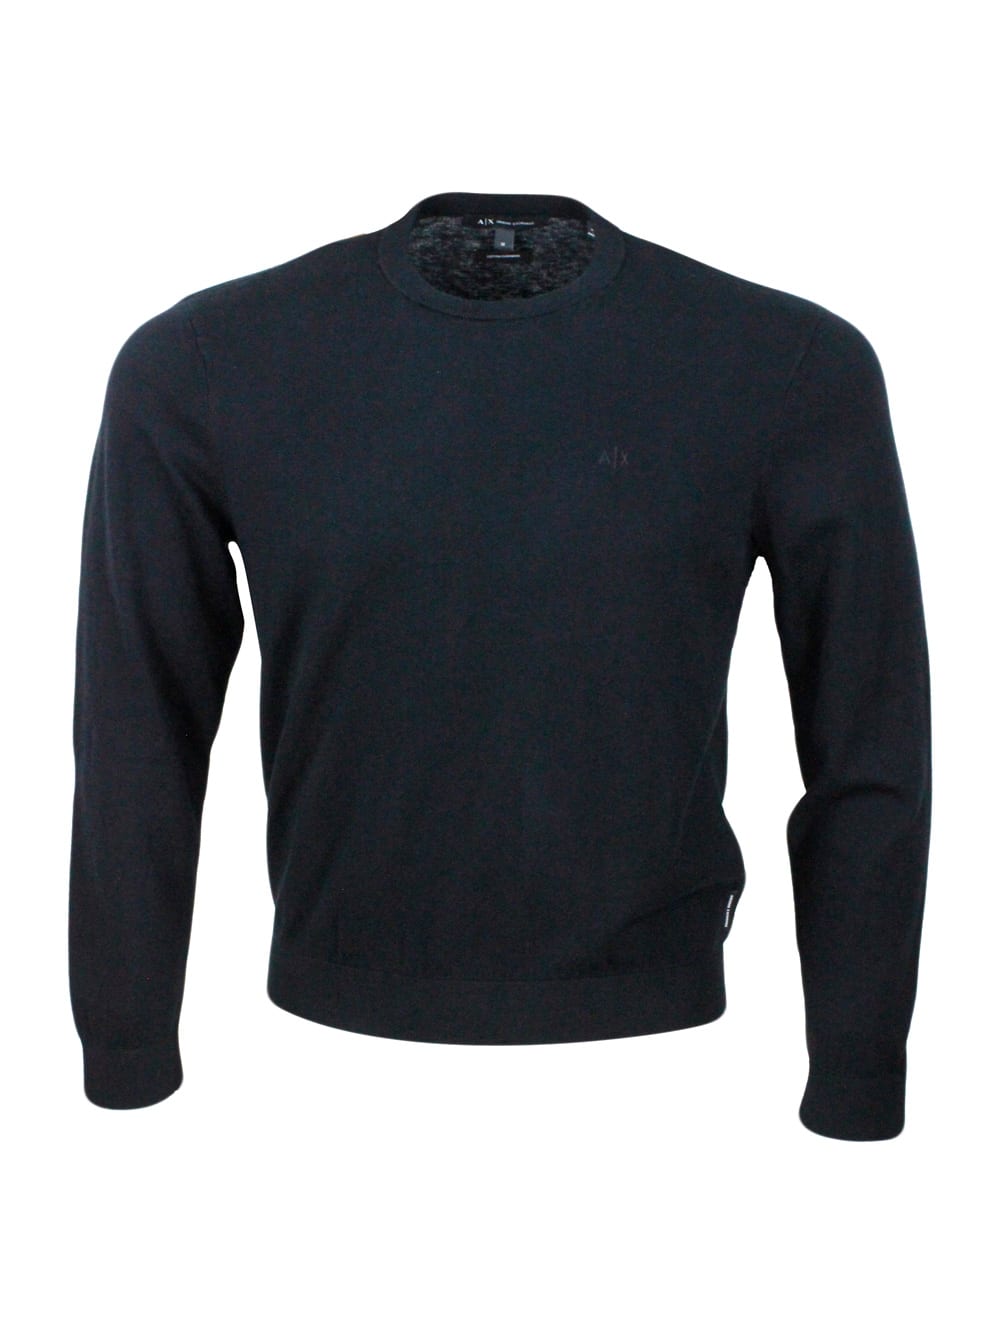 Lightweight Long-sleeved Crew-neck Sweater Made Of Warm Cotton And Cashmere With Contrasting Color Profiles At The Bottom And On The Cuffs